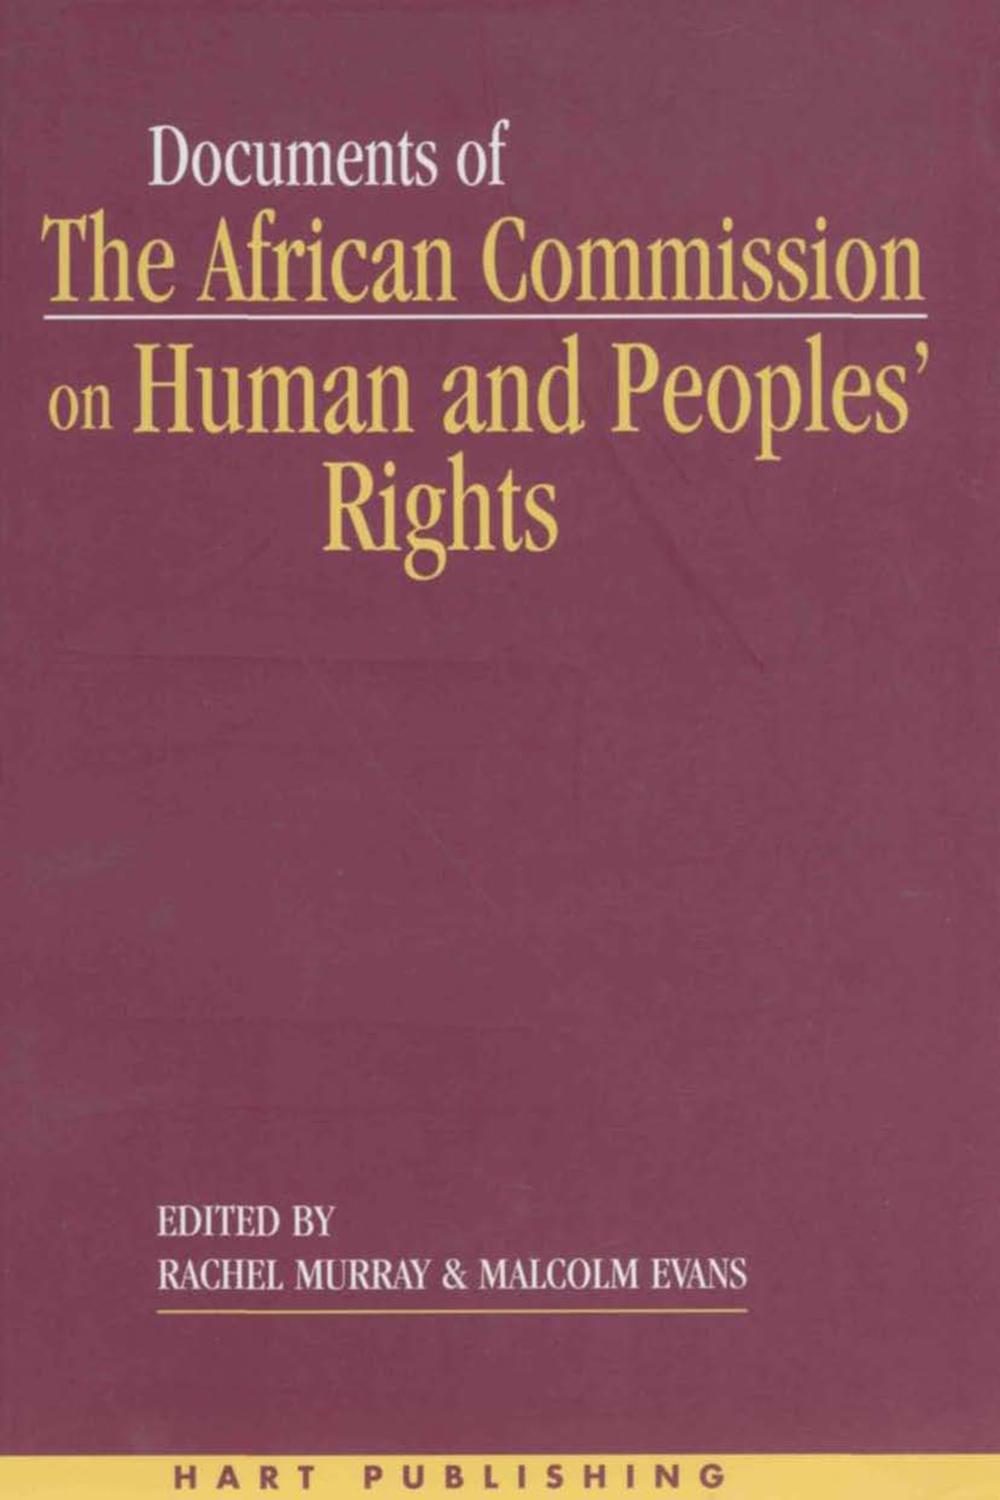 Documents of the African Commission on Human and Peoples' Rights - Volume 1, 1987-1998 - Rachel Murray, Malcolm Evans